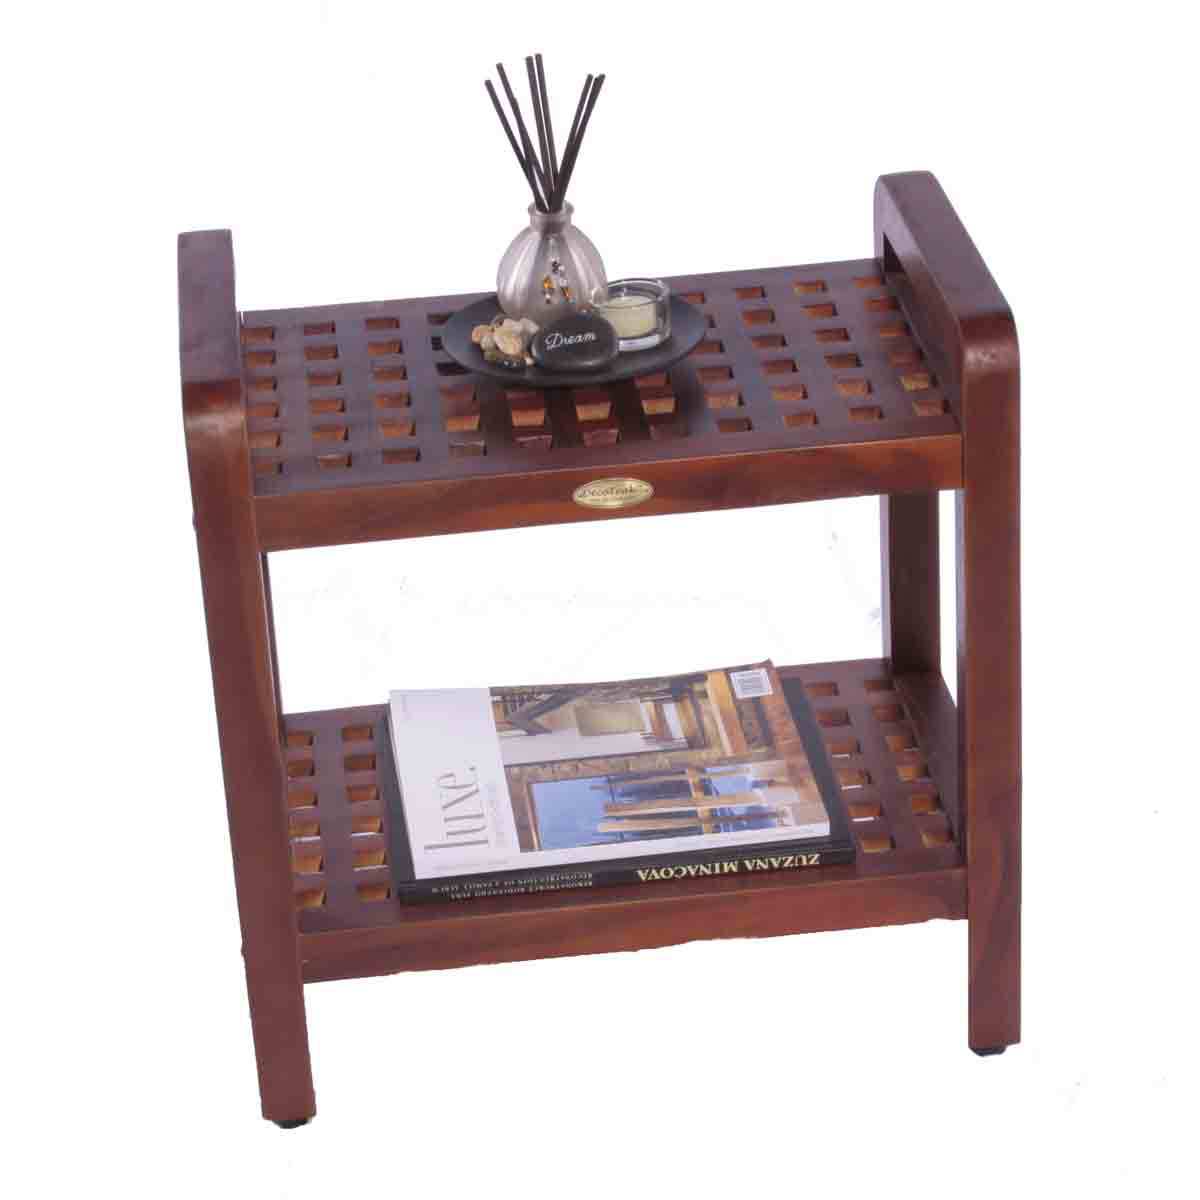 DT112 18" Teak Shower Stool with Shelf and Lift Aide Arms